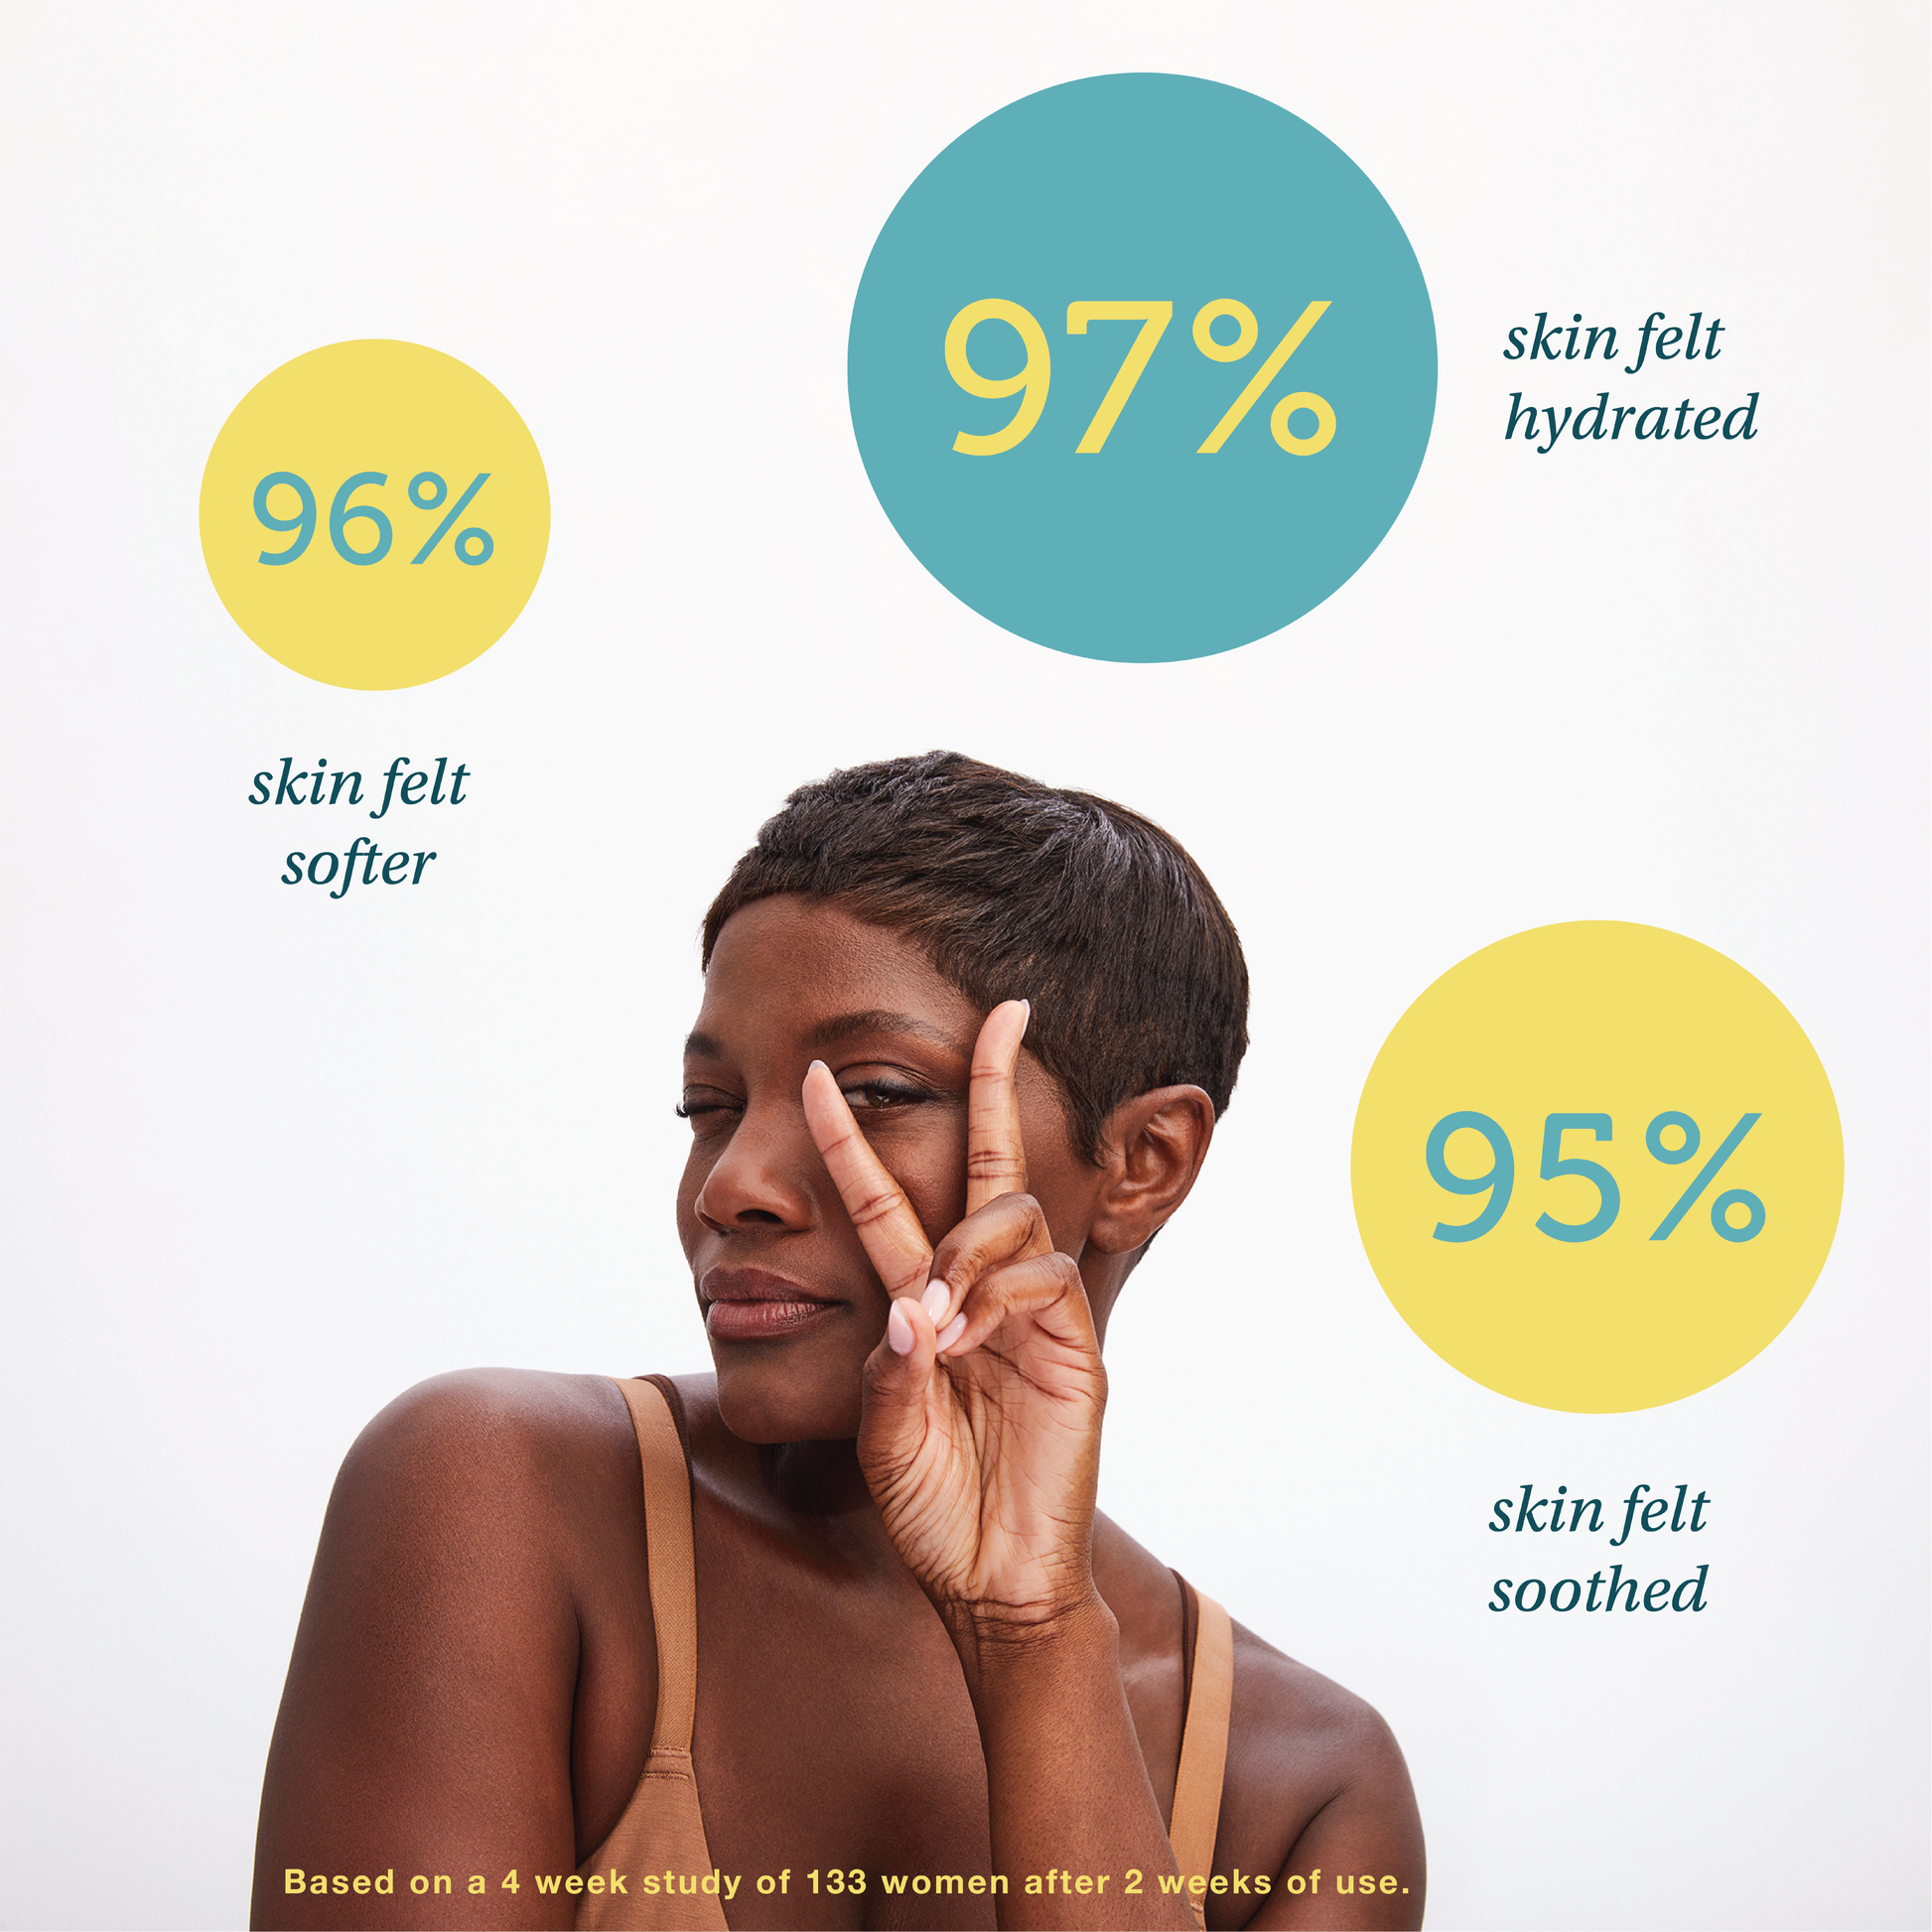 Results based on a 4-week study of 133 women consumer after 2 weeks of use of vulva cream.